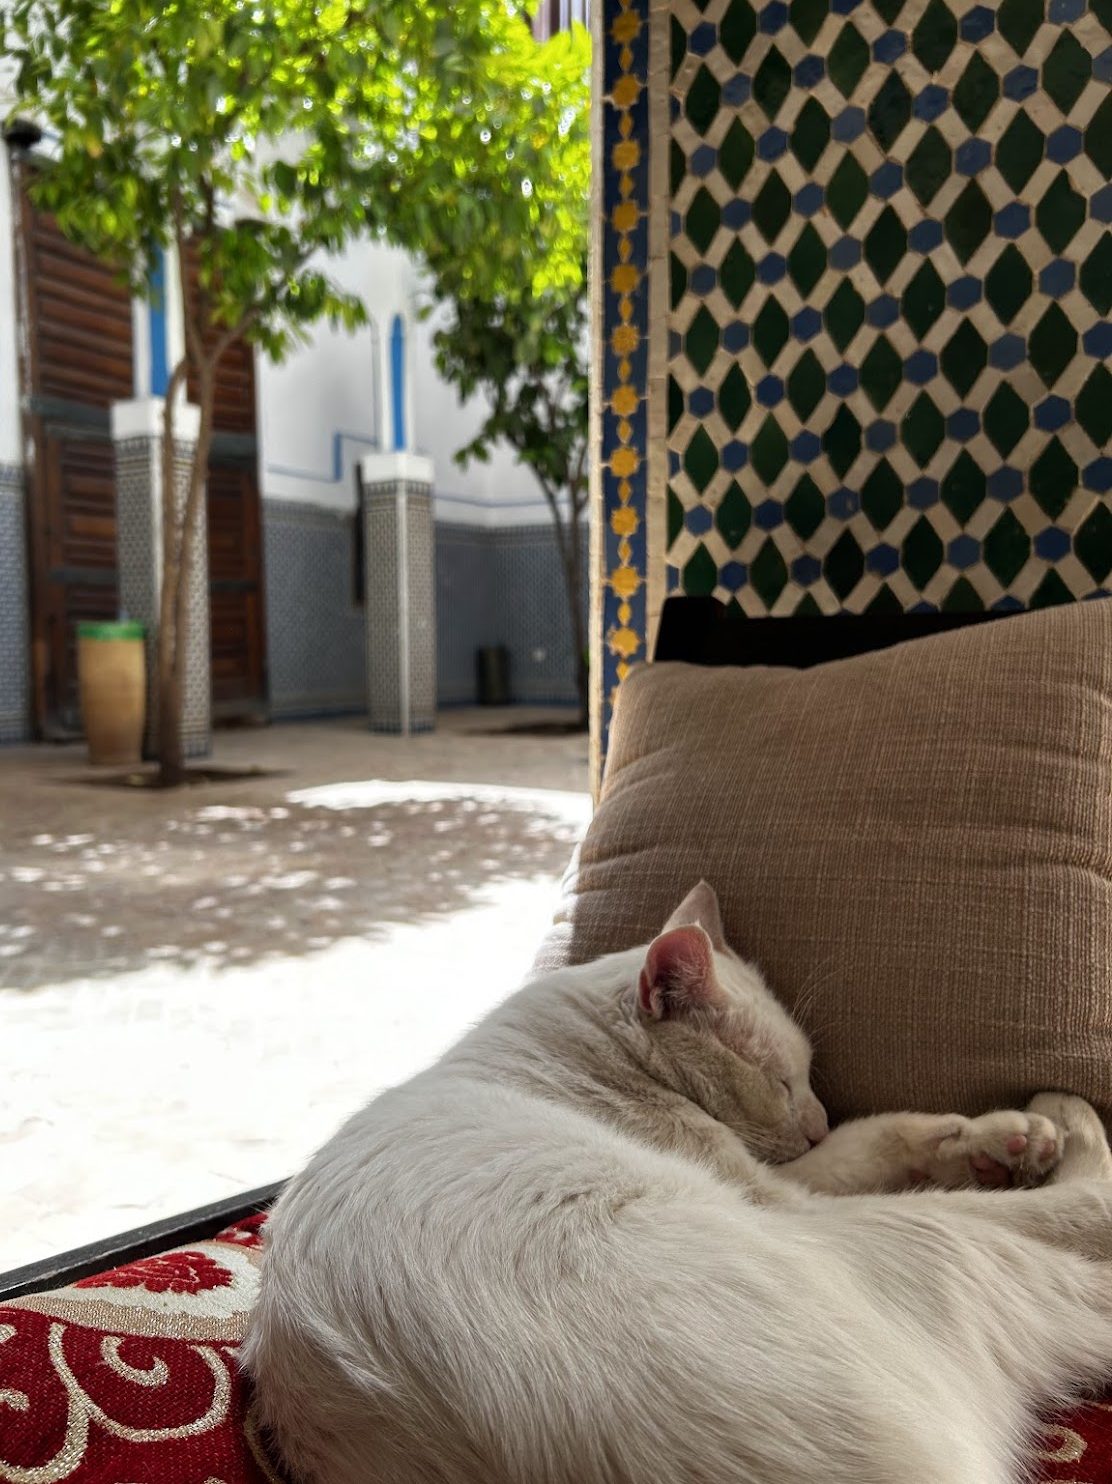 A white cat sleeping in a red decorative chair